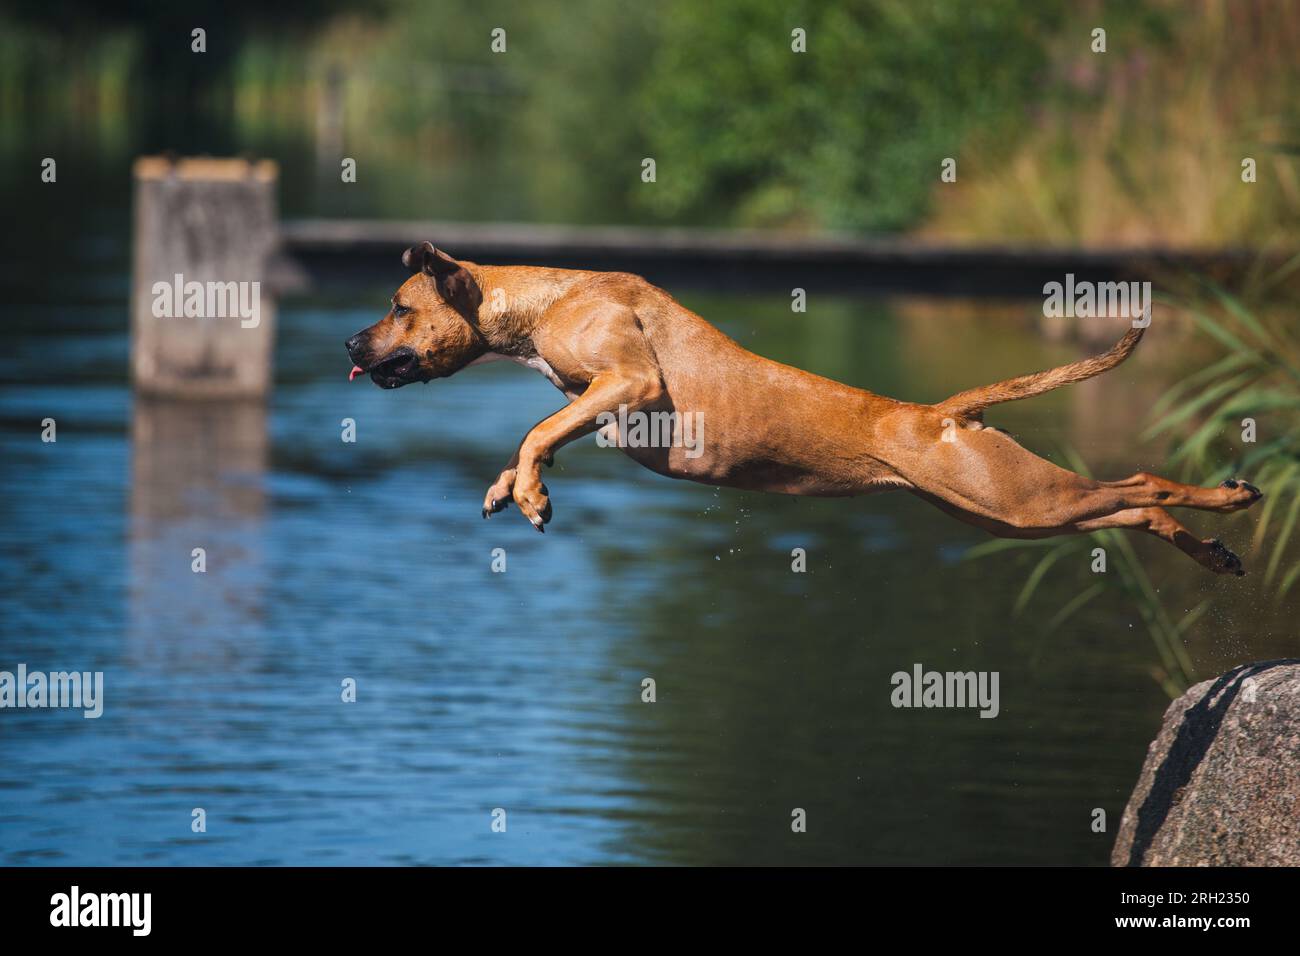 Brown dog jumping into the water on a hot summer day Stock Photo